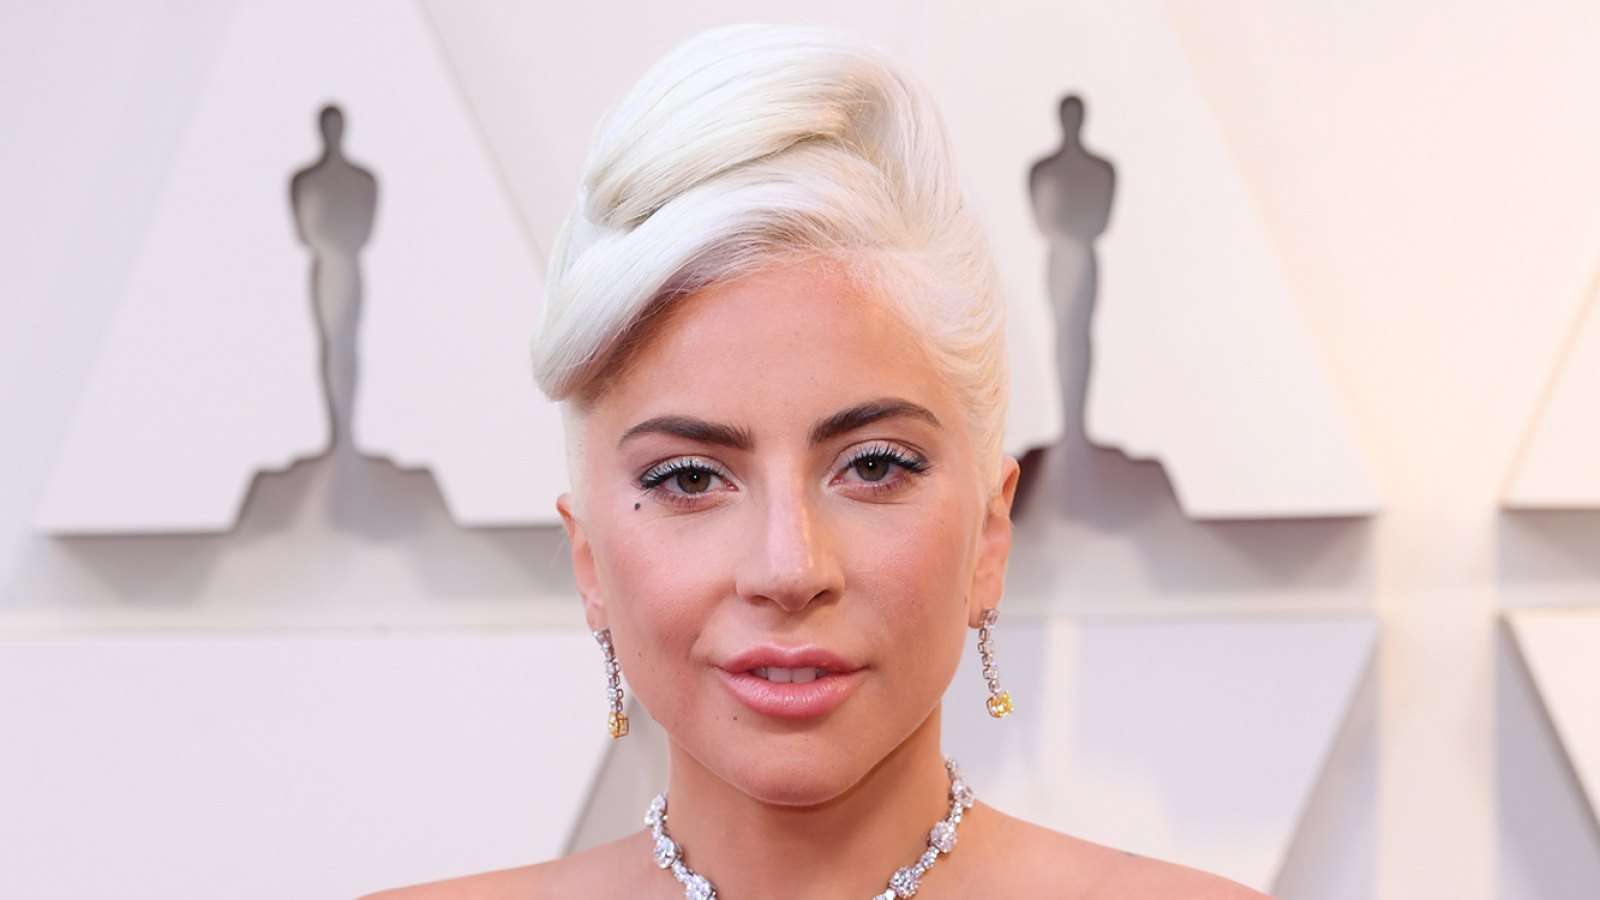 Lady Gaga Reveals She Wants to ‘Have Babies’ in the Next Decade